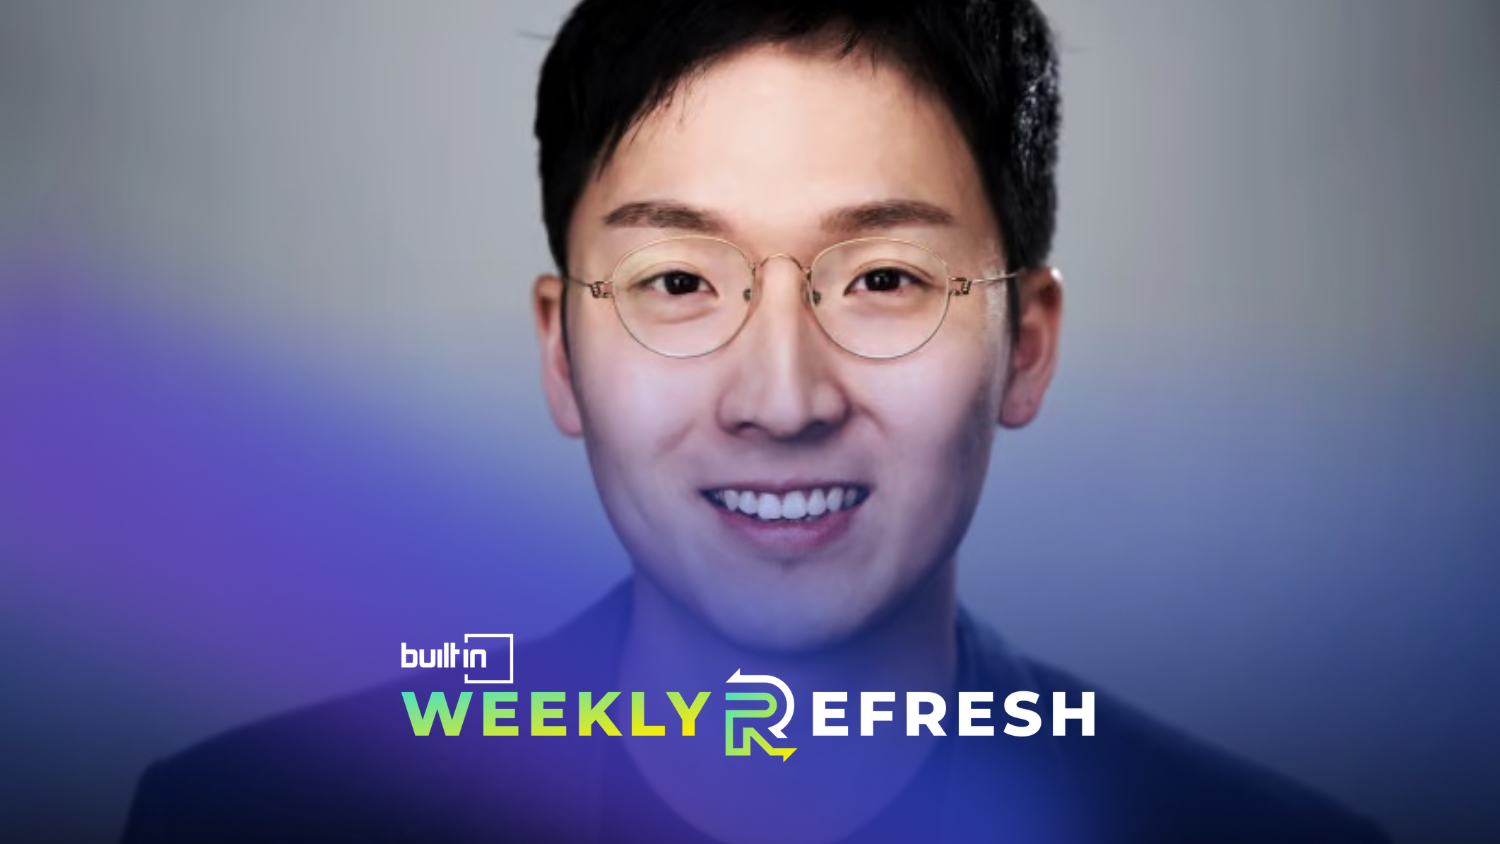 Amogy co-founder and CEO Seonghoon Woo appears above the Built In Weekly Refresh logo.